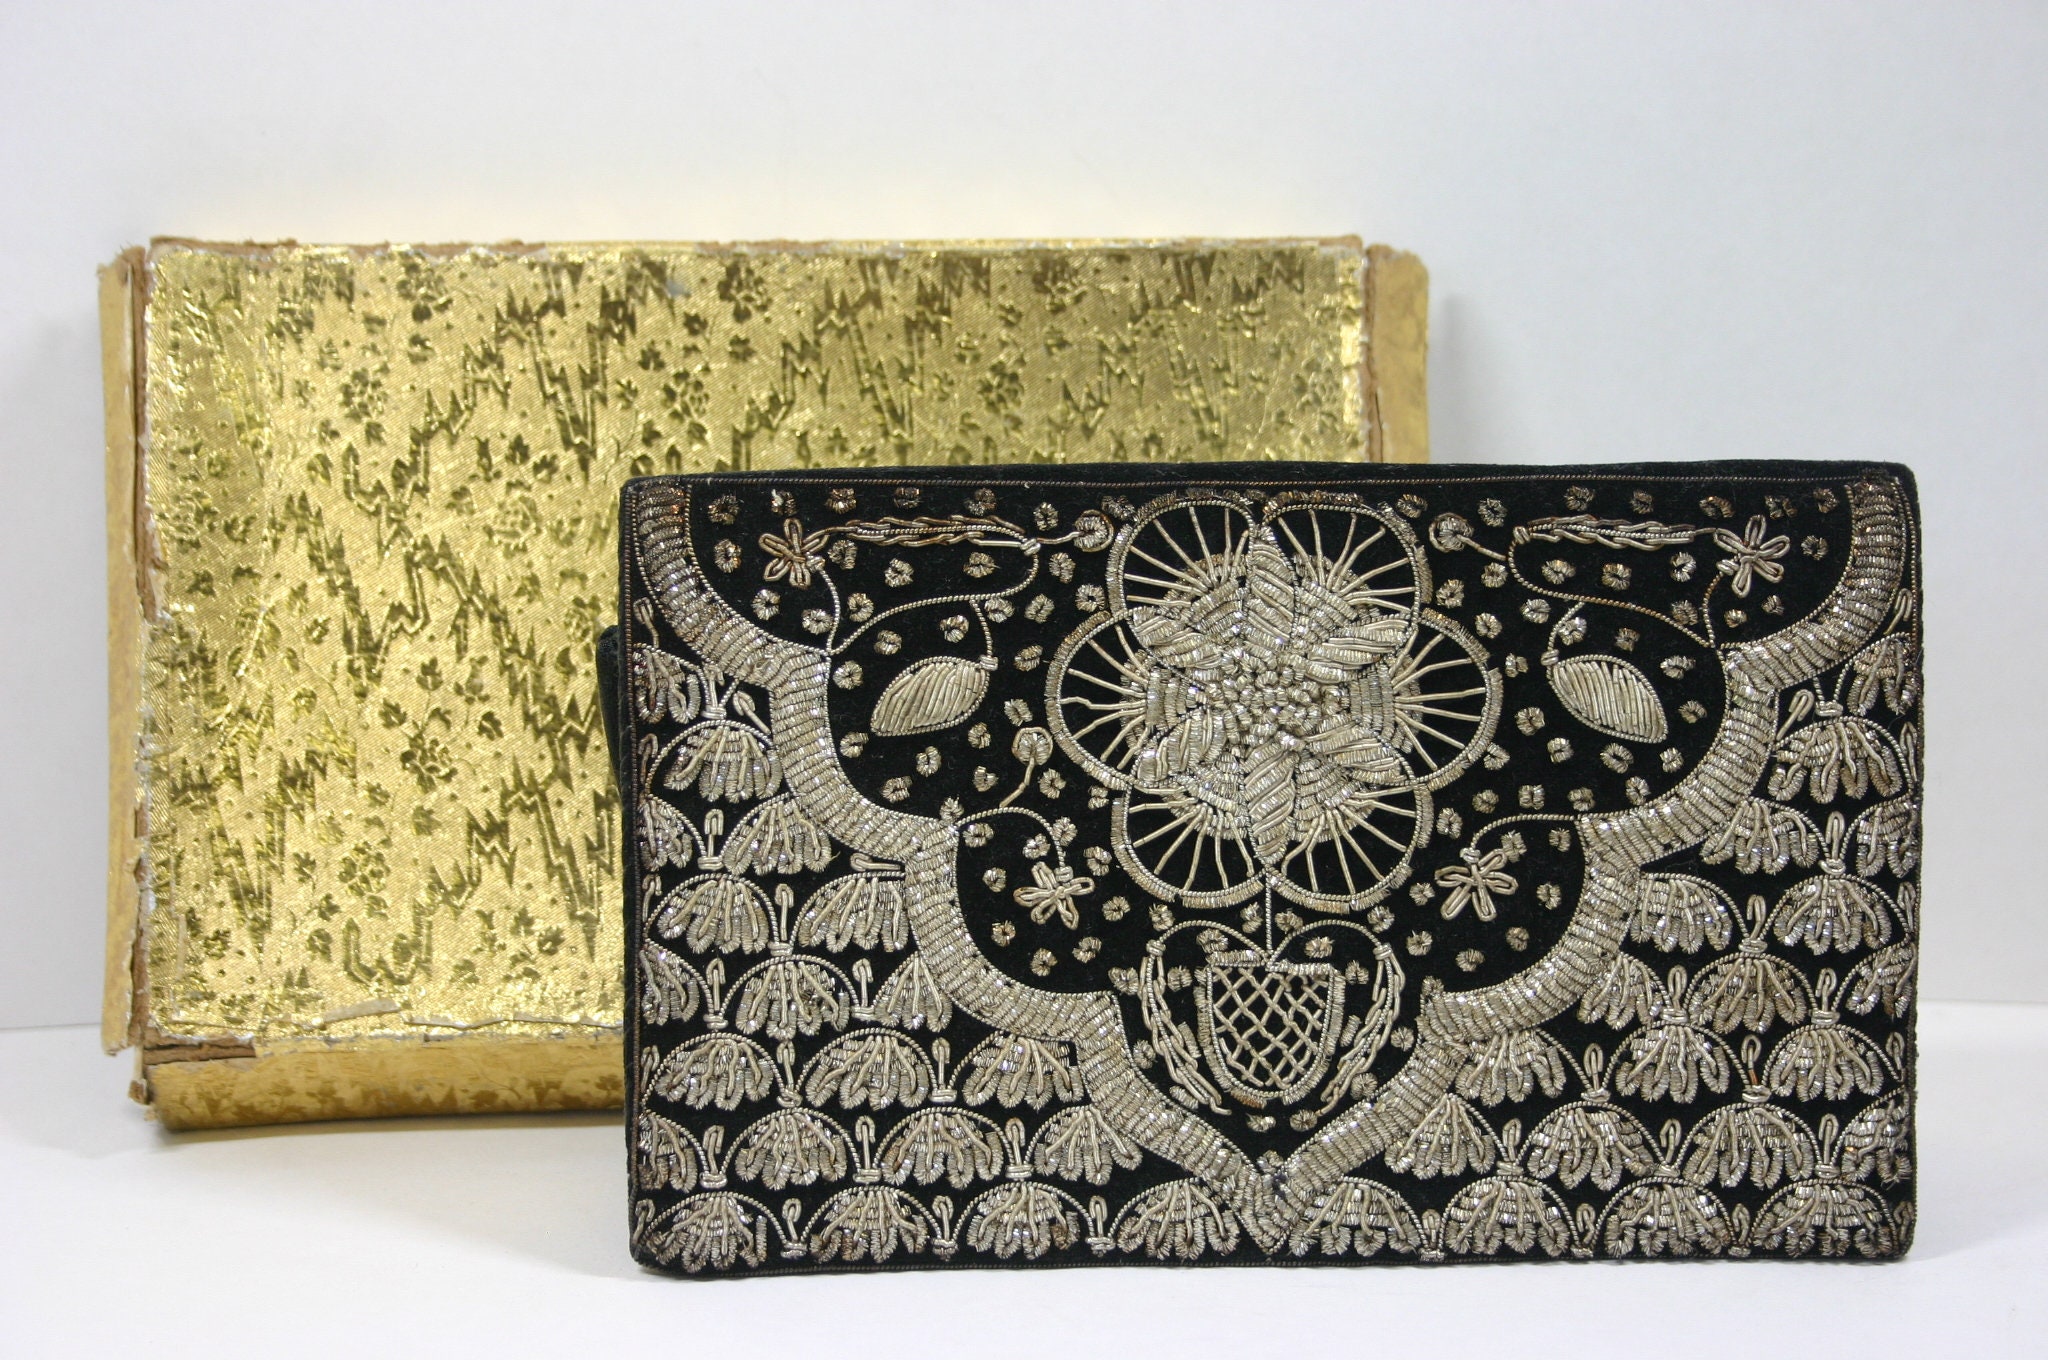 Vintage 1950s 1960s Japan Italy evening clutch purse